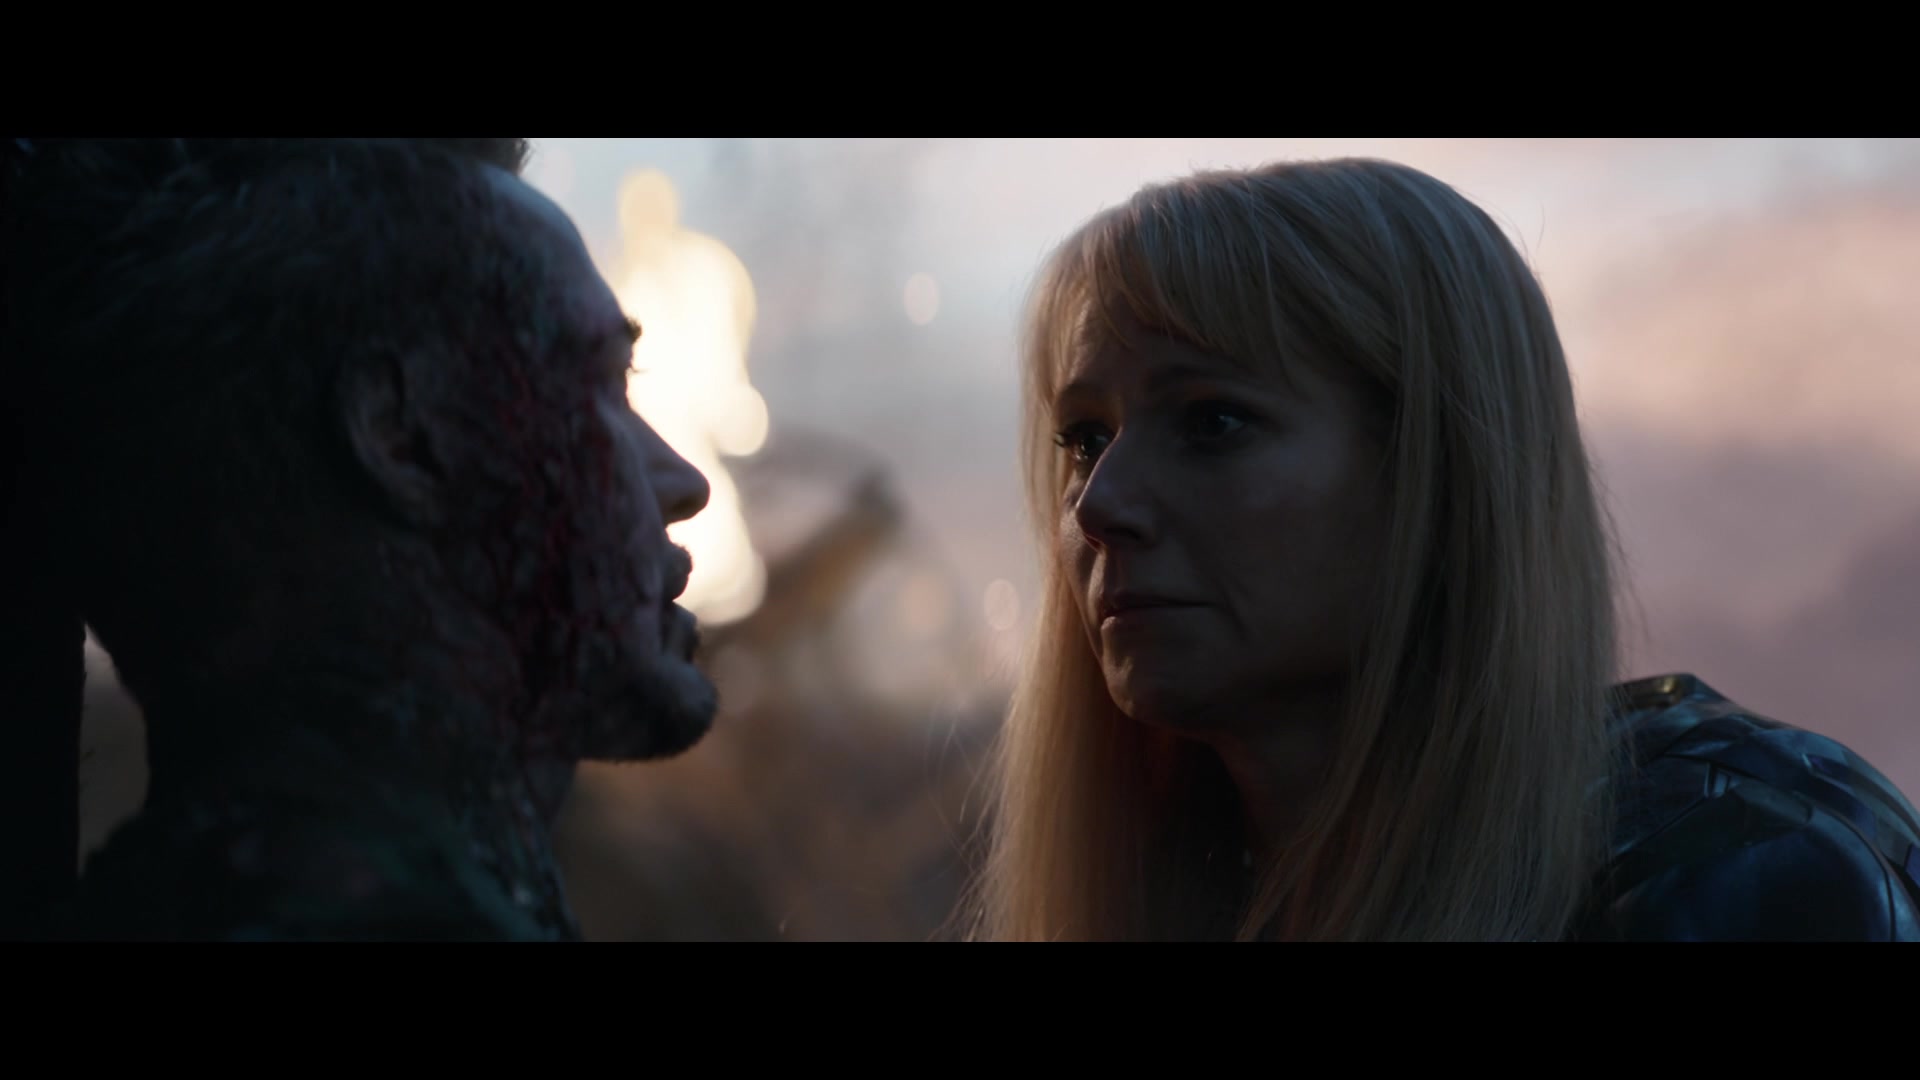 Pepper Potts (Gwenyth Paltrow) rushes to Tony Stark's (Robert Downey Jr.) side after he saves the universe in Avengers: Endgame (2019), Marvel Entertainment